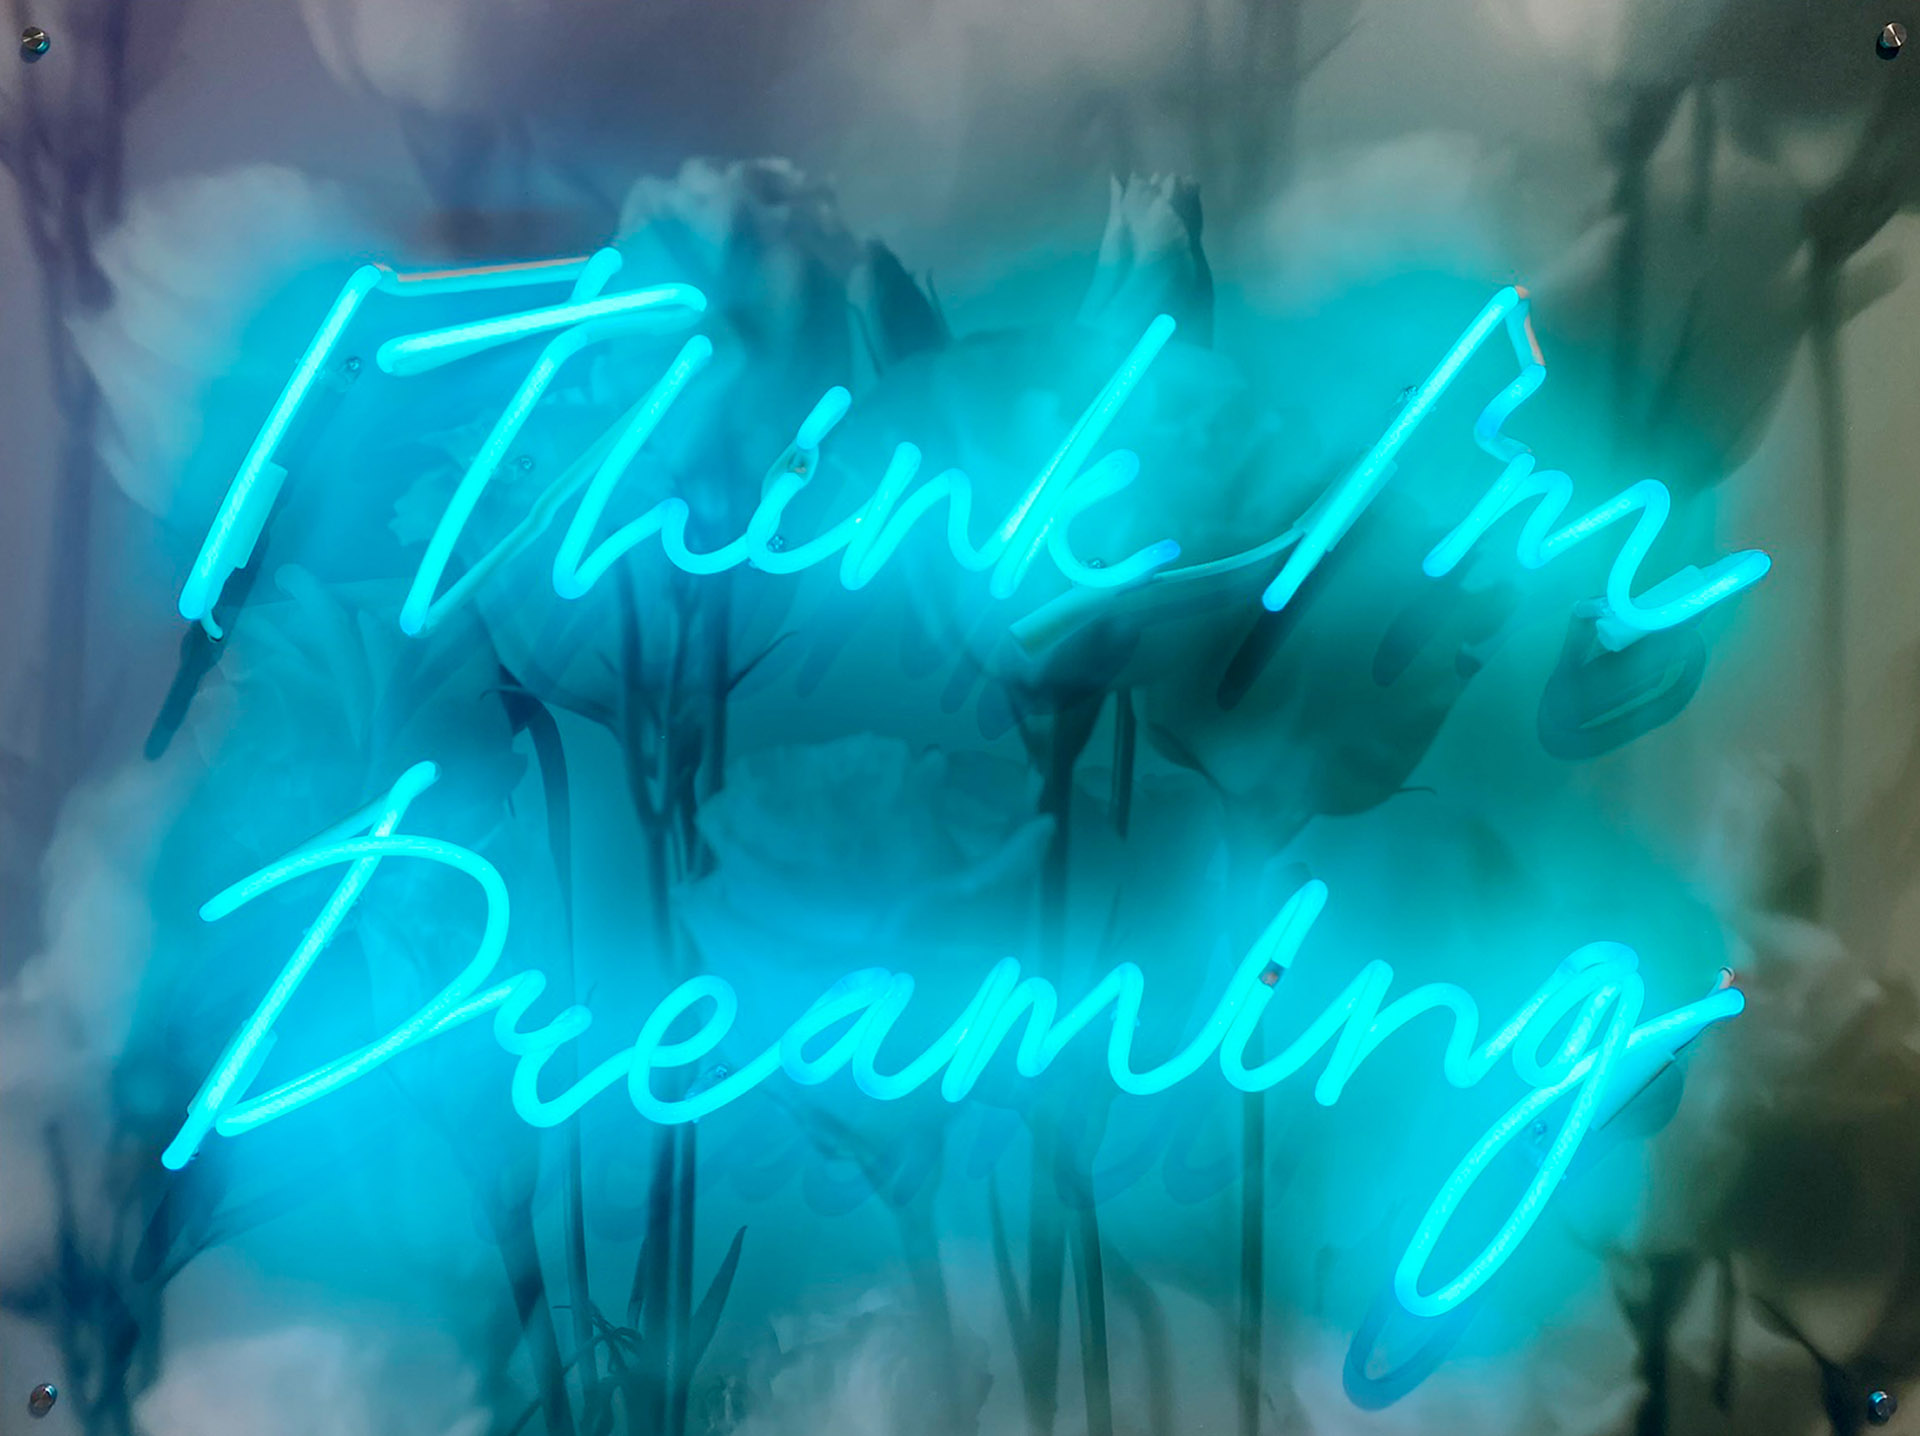 Indira-Cesarine-I-Think-Im-Dreaming-Neon-Sculpture-Photography-Mounted-on-Sintra-1920.jpg